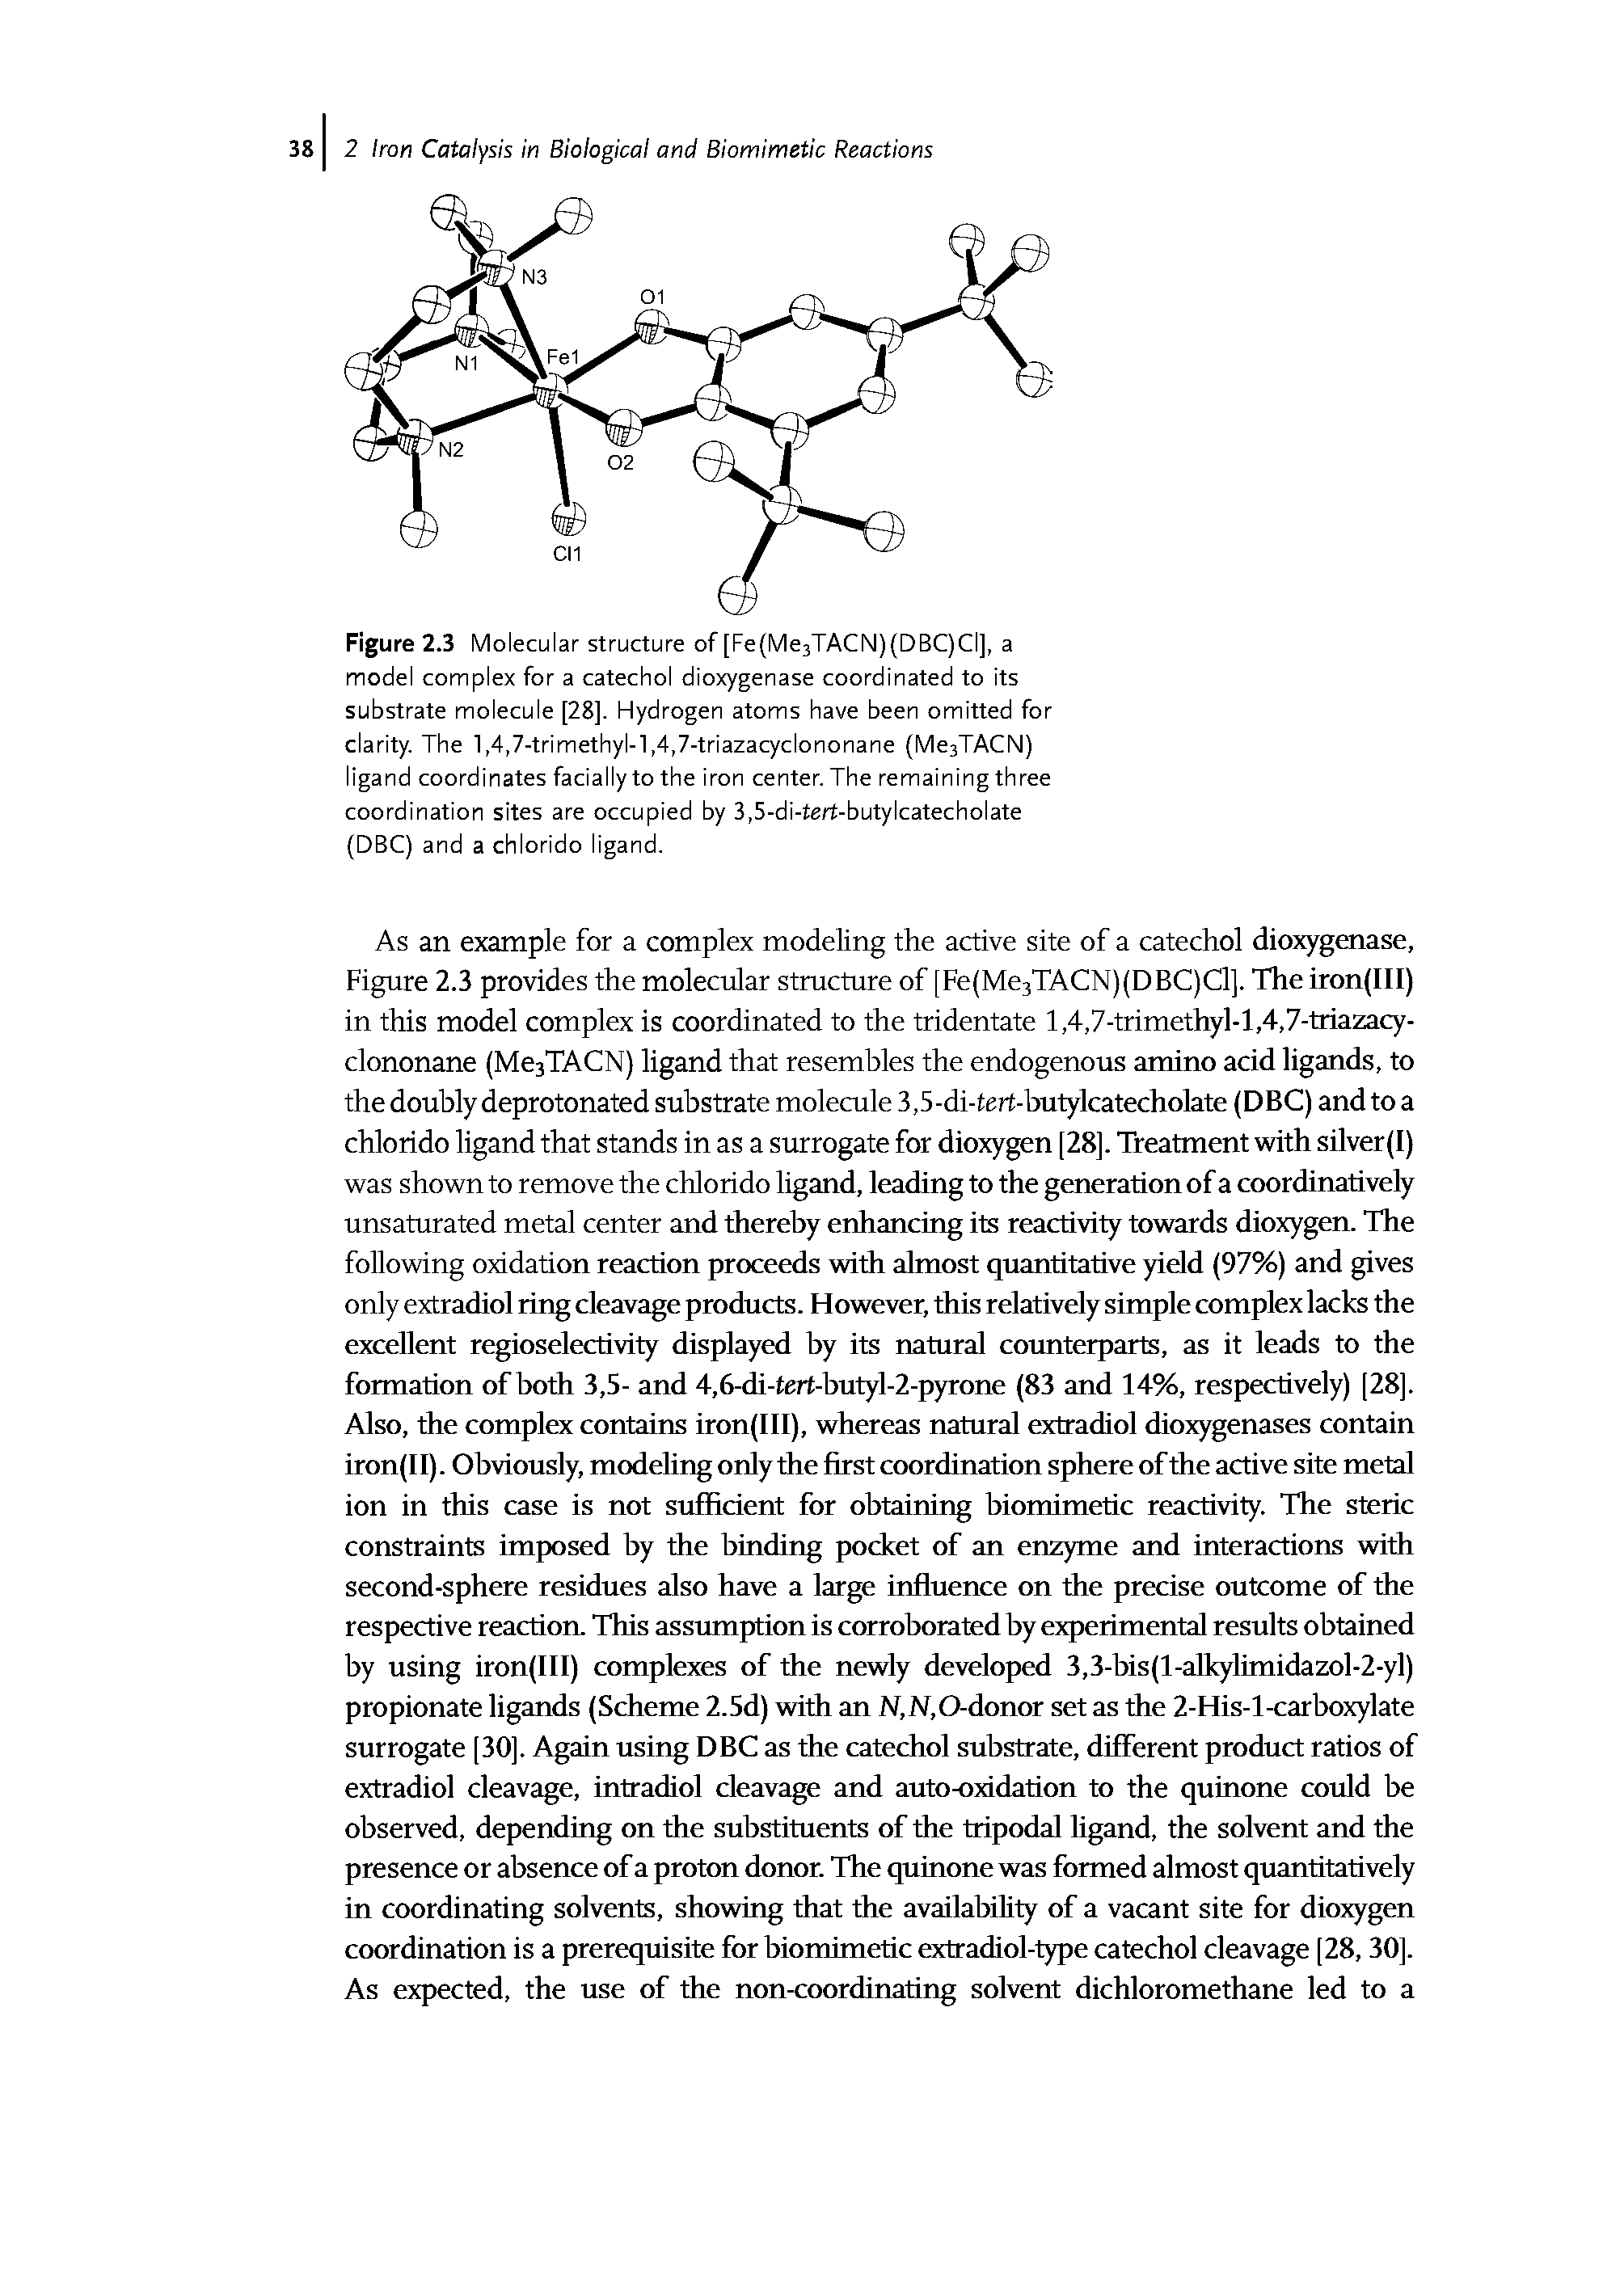 Figure 2.3 Molecular structure of [Fe(Me3TACN)(DBC)CI], a model complex for a catechol dioxygenase coordinated to its substrate molecule [28]. Hydrogen atoms have been omitted for clarity. The l,4,7-trimethyl-l,4,7-triazacyclononane (Me3TACN) ligand coordinates facially to the iron center. The remaining three coordination sites are occupied by 3,5-di-tert-butylcatecholate (DBC) and a chlorido ligand.